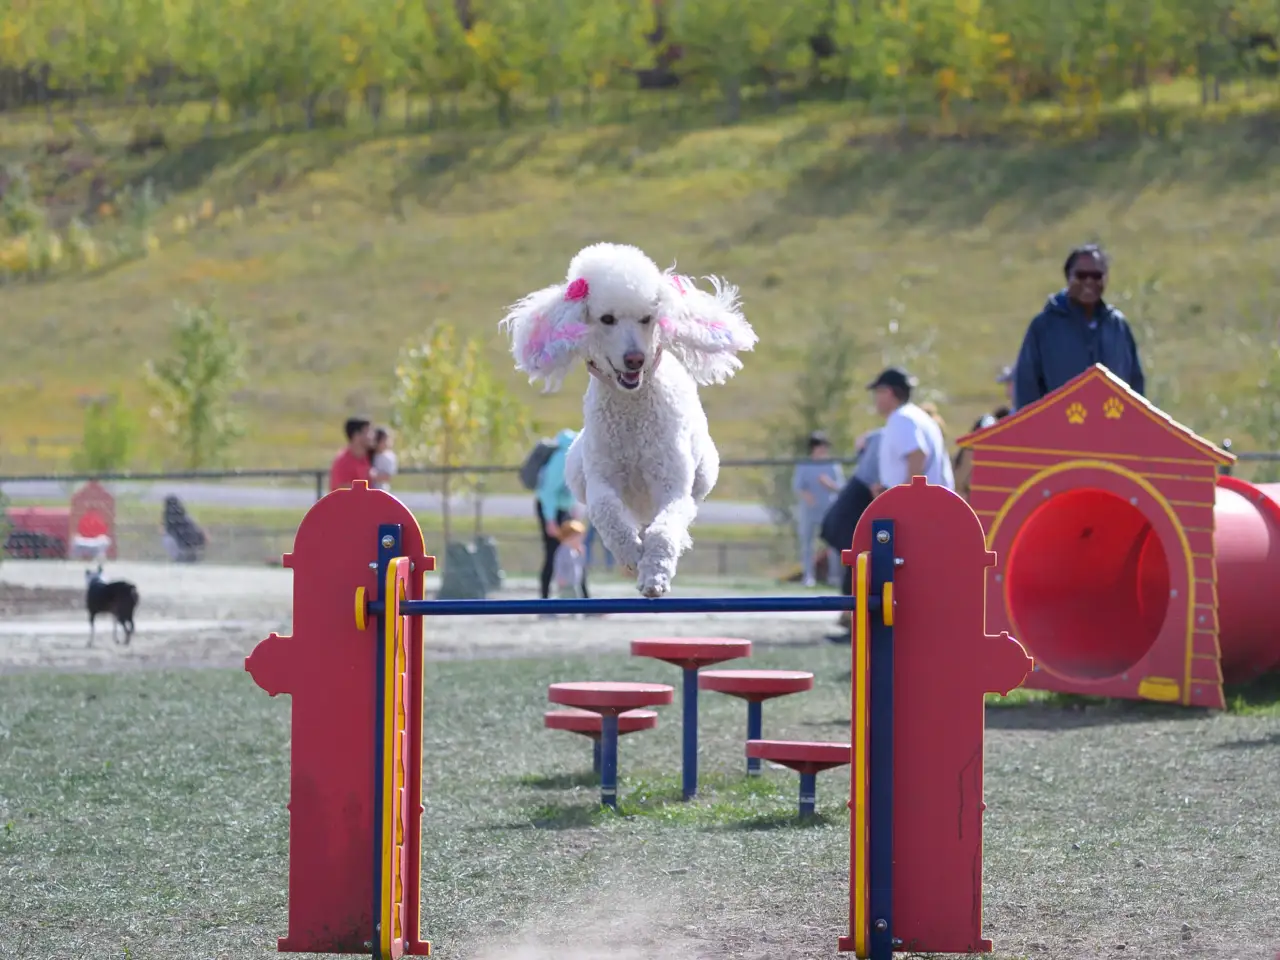 Energetic poodle leaping over a hurdle with grace and agility, showcasing the wonderful amenities at the Wolf Willow Dog Park